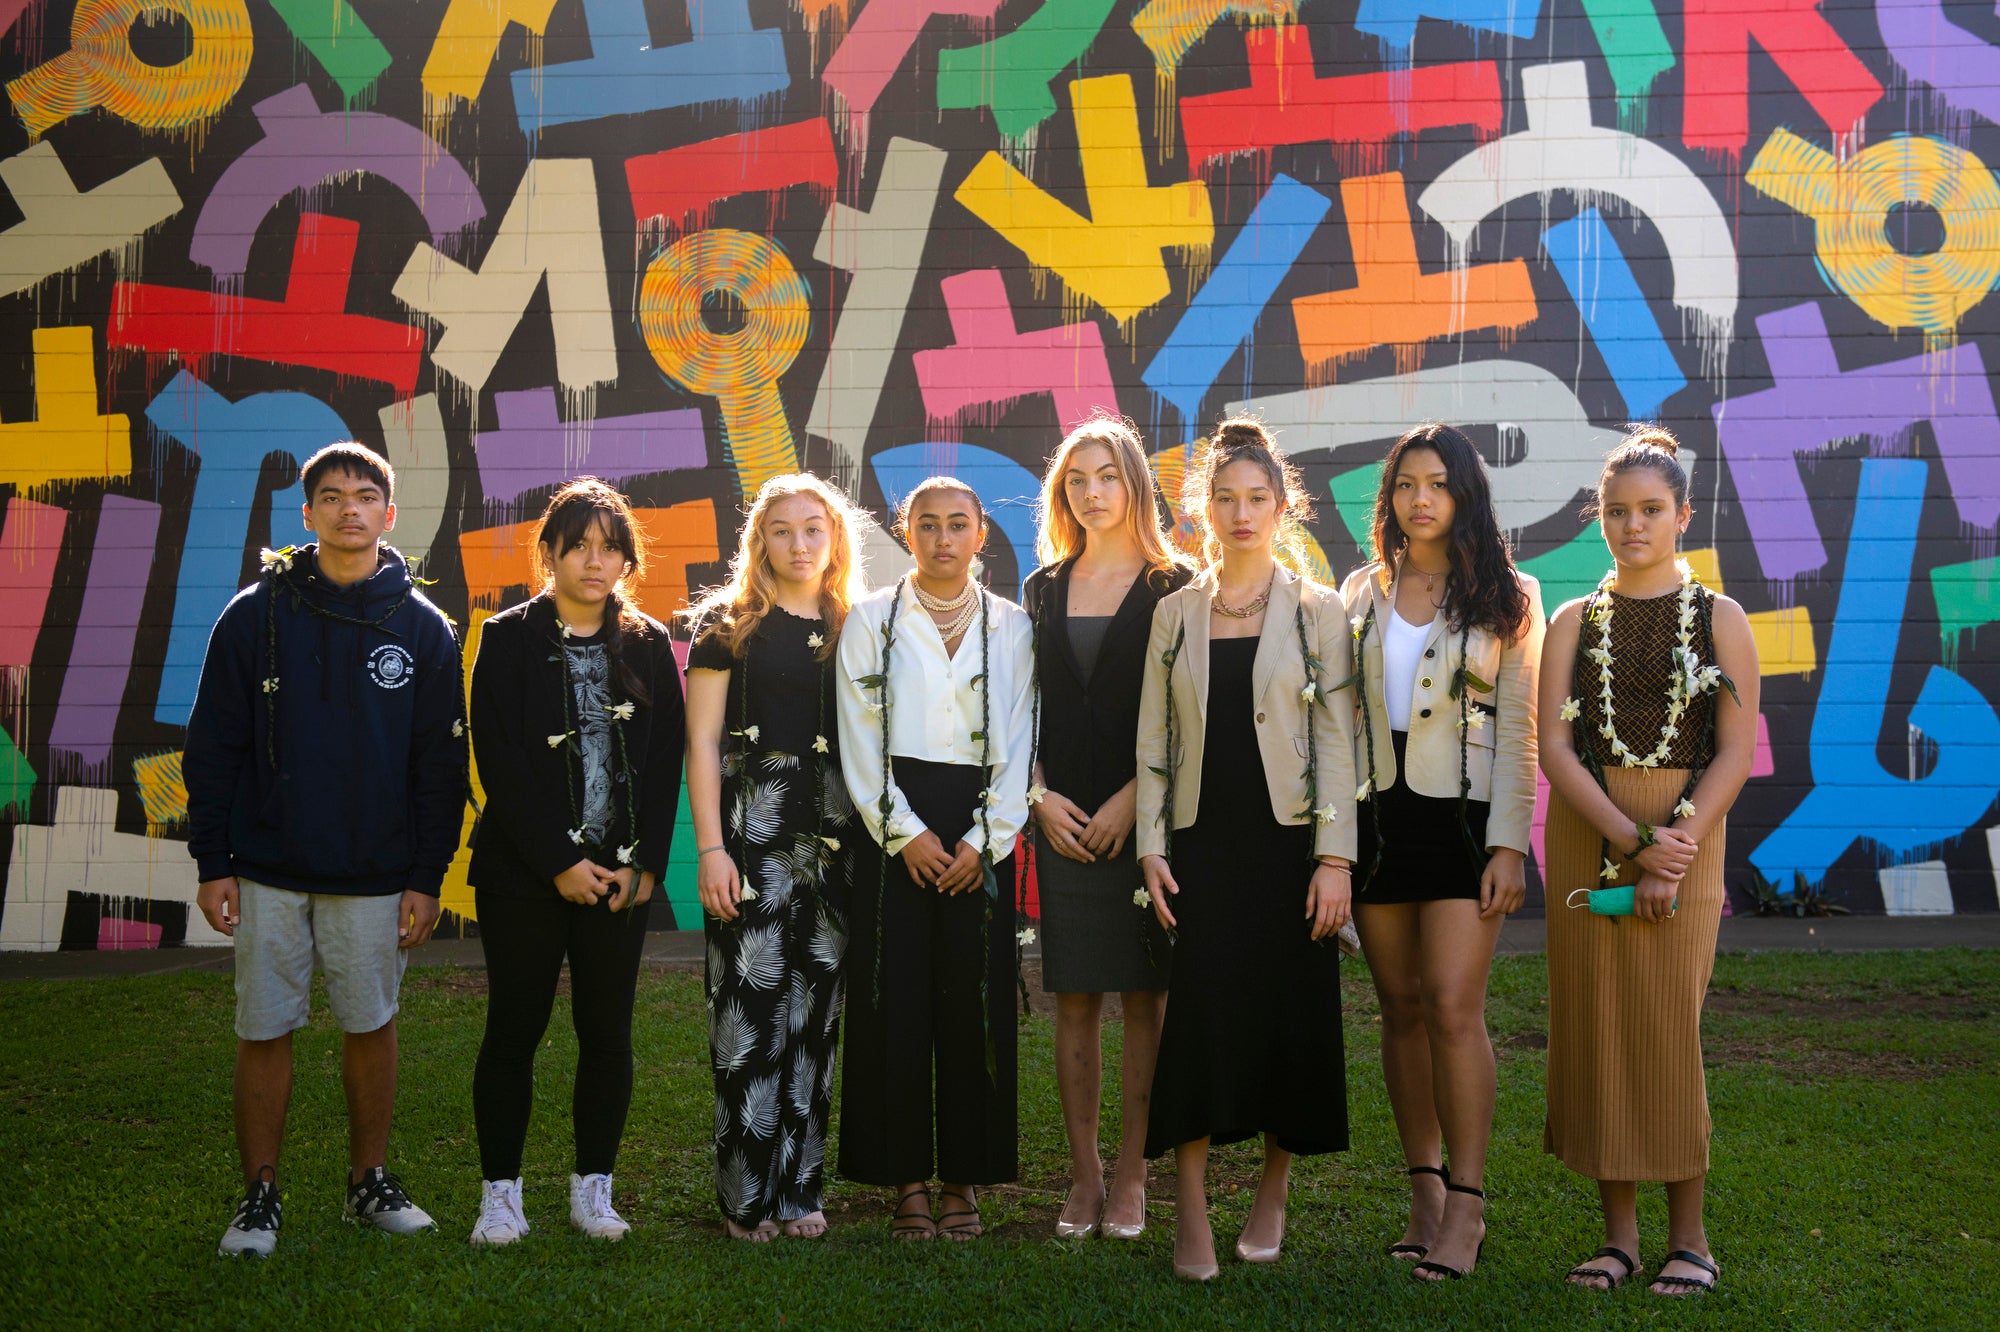 Teens in front of a colorful mural.